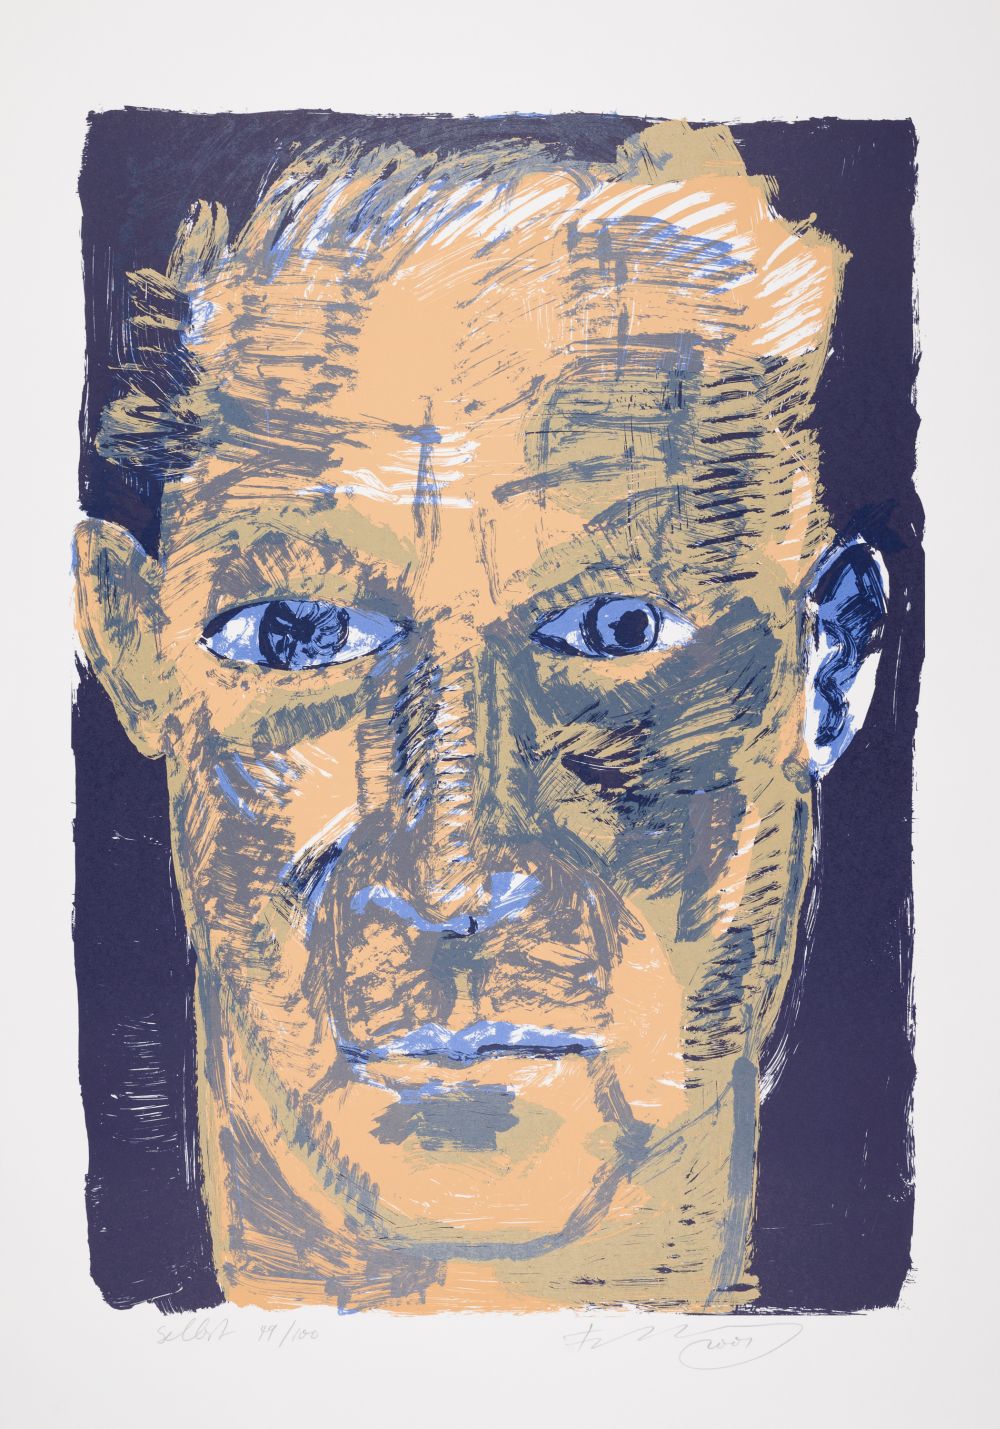 Self, 2001 Colored lithography Signed and dated lower right, titled and numbered lower left: 49/